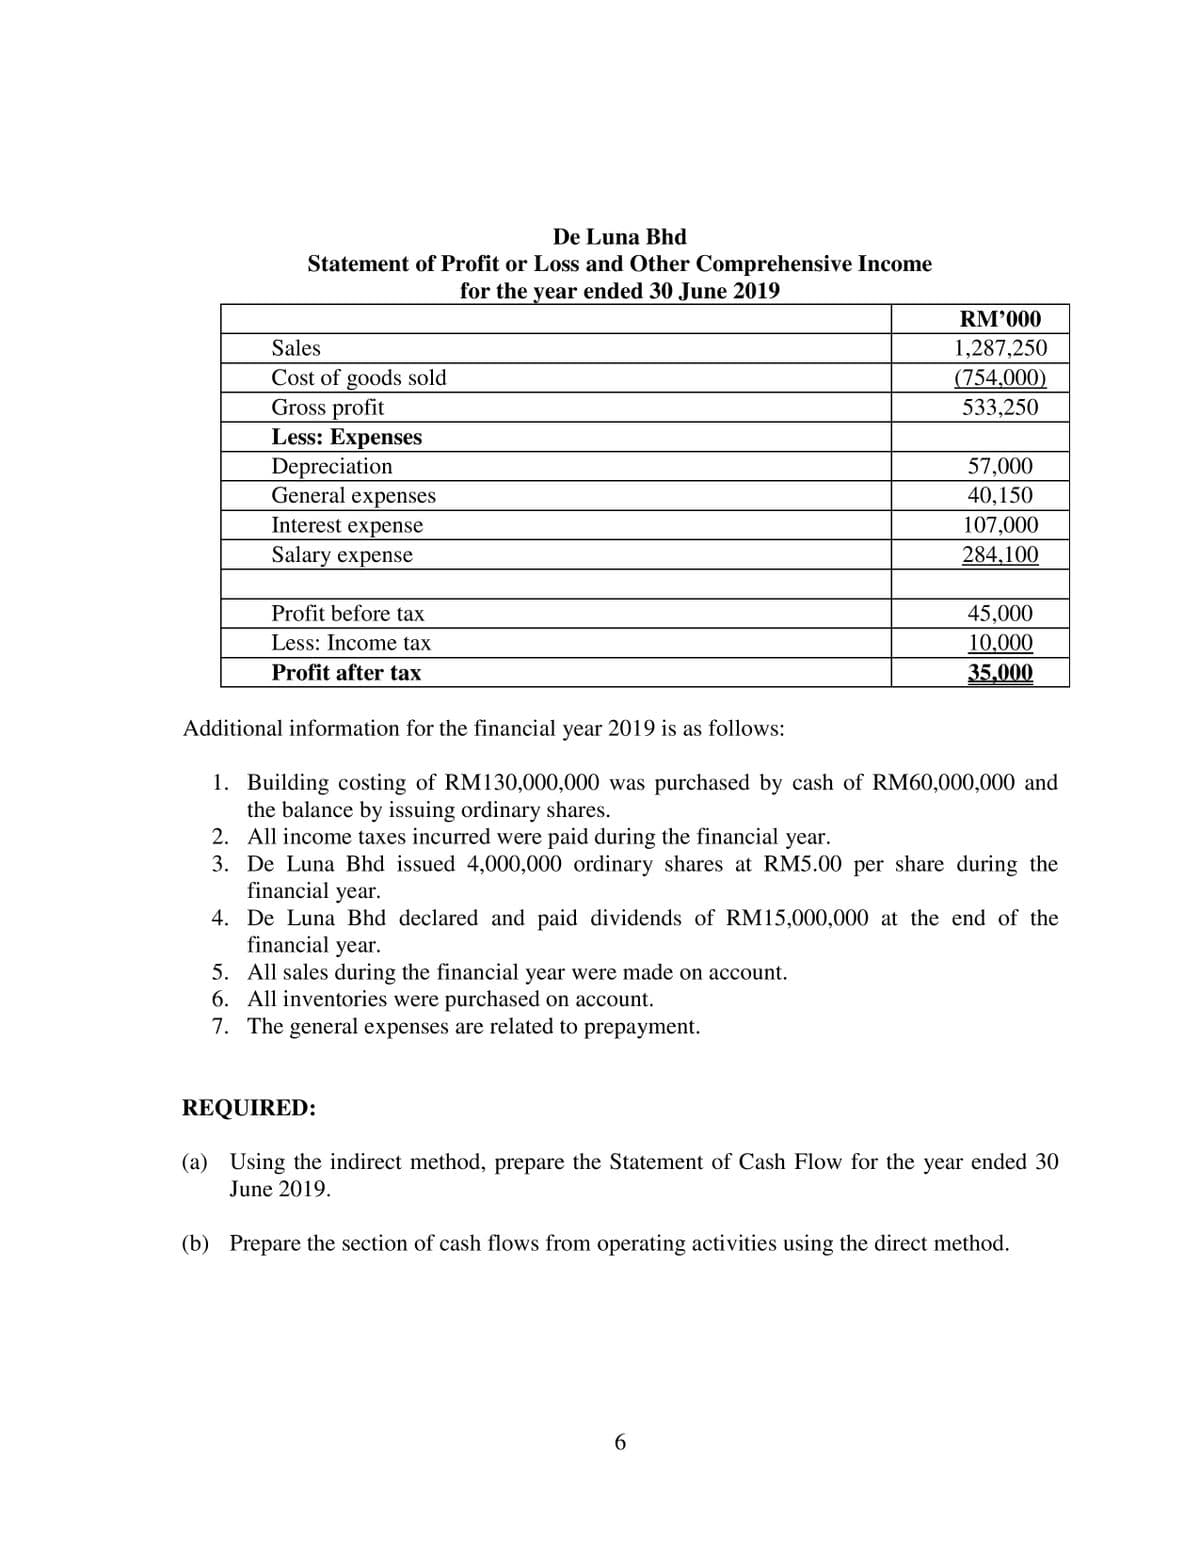 De Luna Bhd
Statement of Profit or Loss and Other Comprehensive Income
for the year ended 30 June 2019
RM'000
Sales
1,287,250
(754,000)
Cost of goods sold
Gross profit
Less: Expenses
Depreciation
General expenses
533,250
57,000
40,150
107,000
Interest expense
Salary expense
284,100
Profit before tax
45,000
Less: Income tax
10,000
Profit after tax
35.000
Additional information for the financial year 2019 is as follows:
1. Building costing of RM130,000,000 was purchased by cash of RM60,000,000 and
the balance by issuing ordinary shares.
2. All income taxes incurred were paid during the financial year.
3. De Luna Bhd issued 4,000,000 ordinary shares at RM5.00 per share during the
financial year.
4. De Luna Bhd declared and paid dividends of RM15,000,000 at the end of the
financial year.
5. All sales during the financial year were made on account.
6. All inventories were purchased on account.
7. The general expenses are related to prepayment.
REQUIRED:
(a) Using the indirect method, prepare the Statement of Cash Flow for the year ended 30
June 2019.
(b) Prepare the section of cash flows from operating activities using the direct method.
